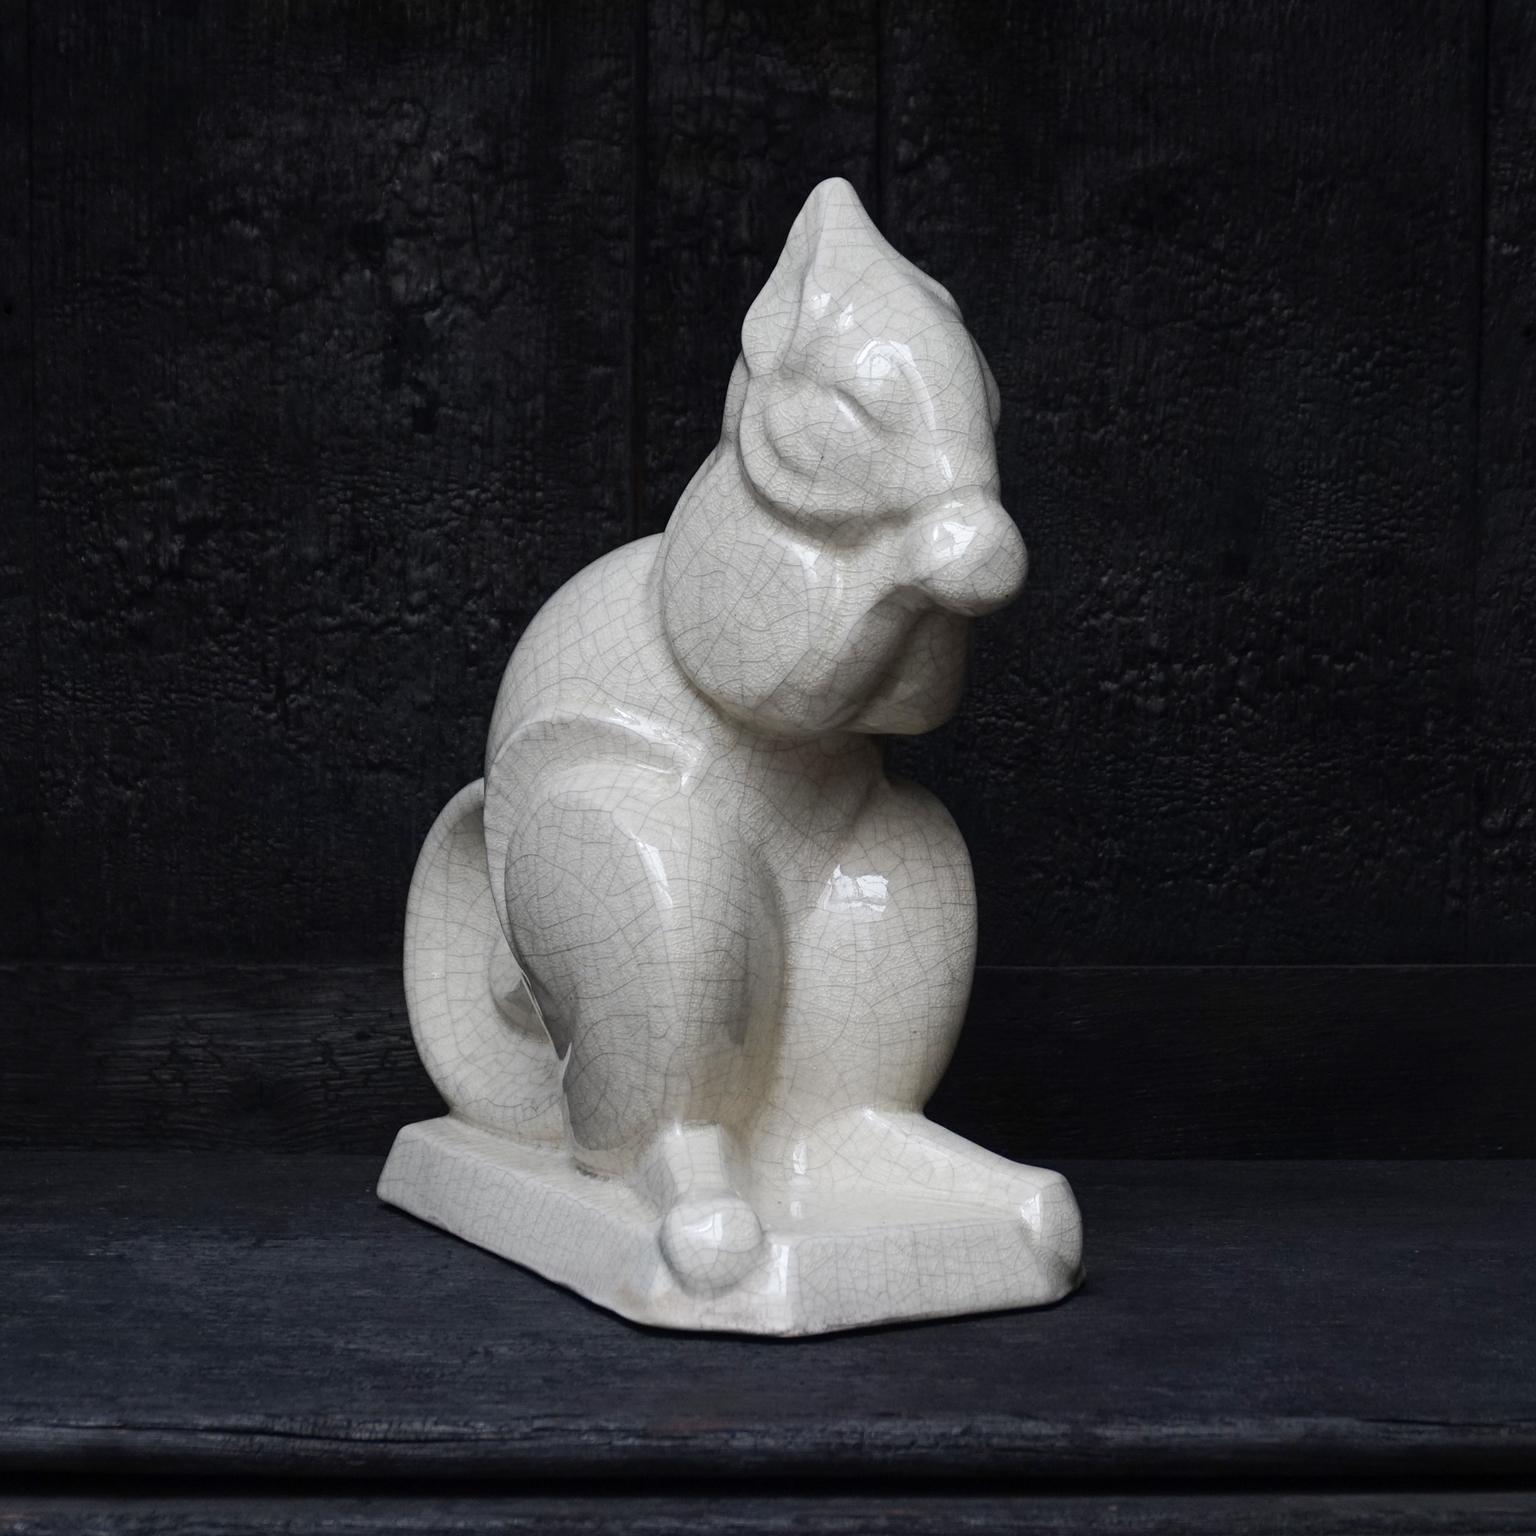 Belgian Early 20th Century French Art Deco Craquelé or Crackle Ceramic Squirrel A.M.C